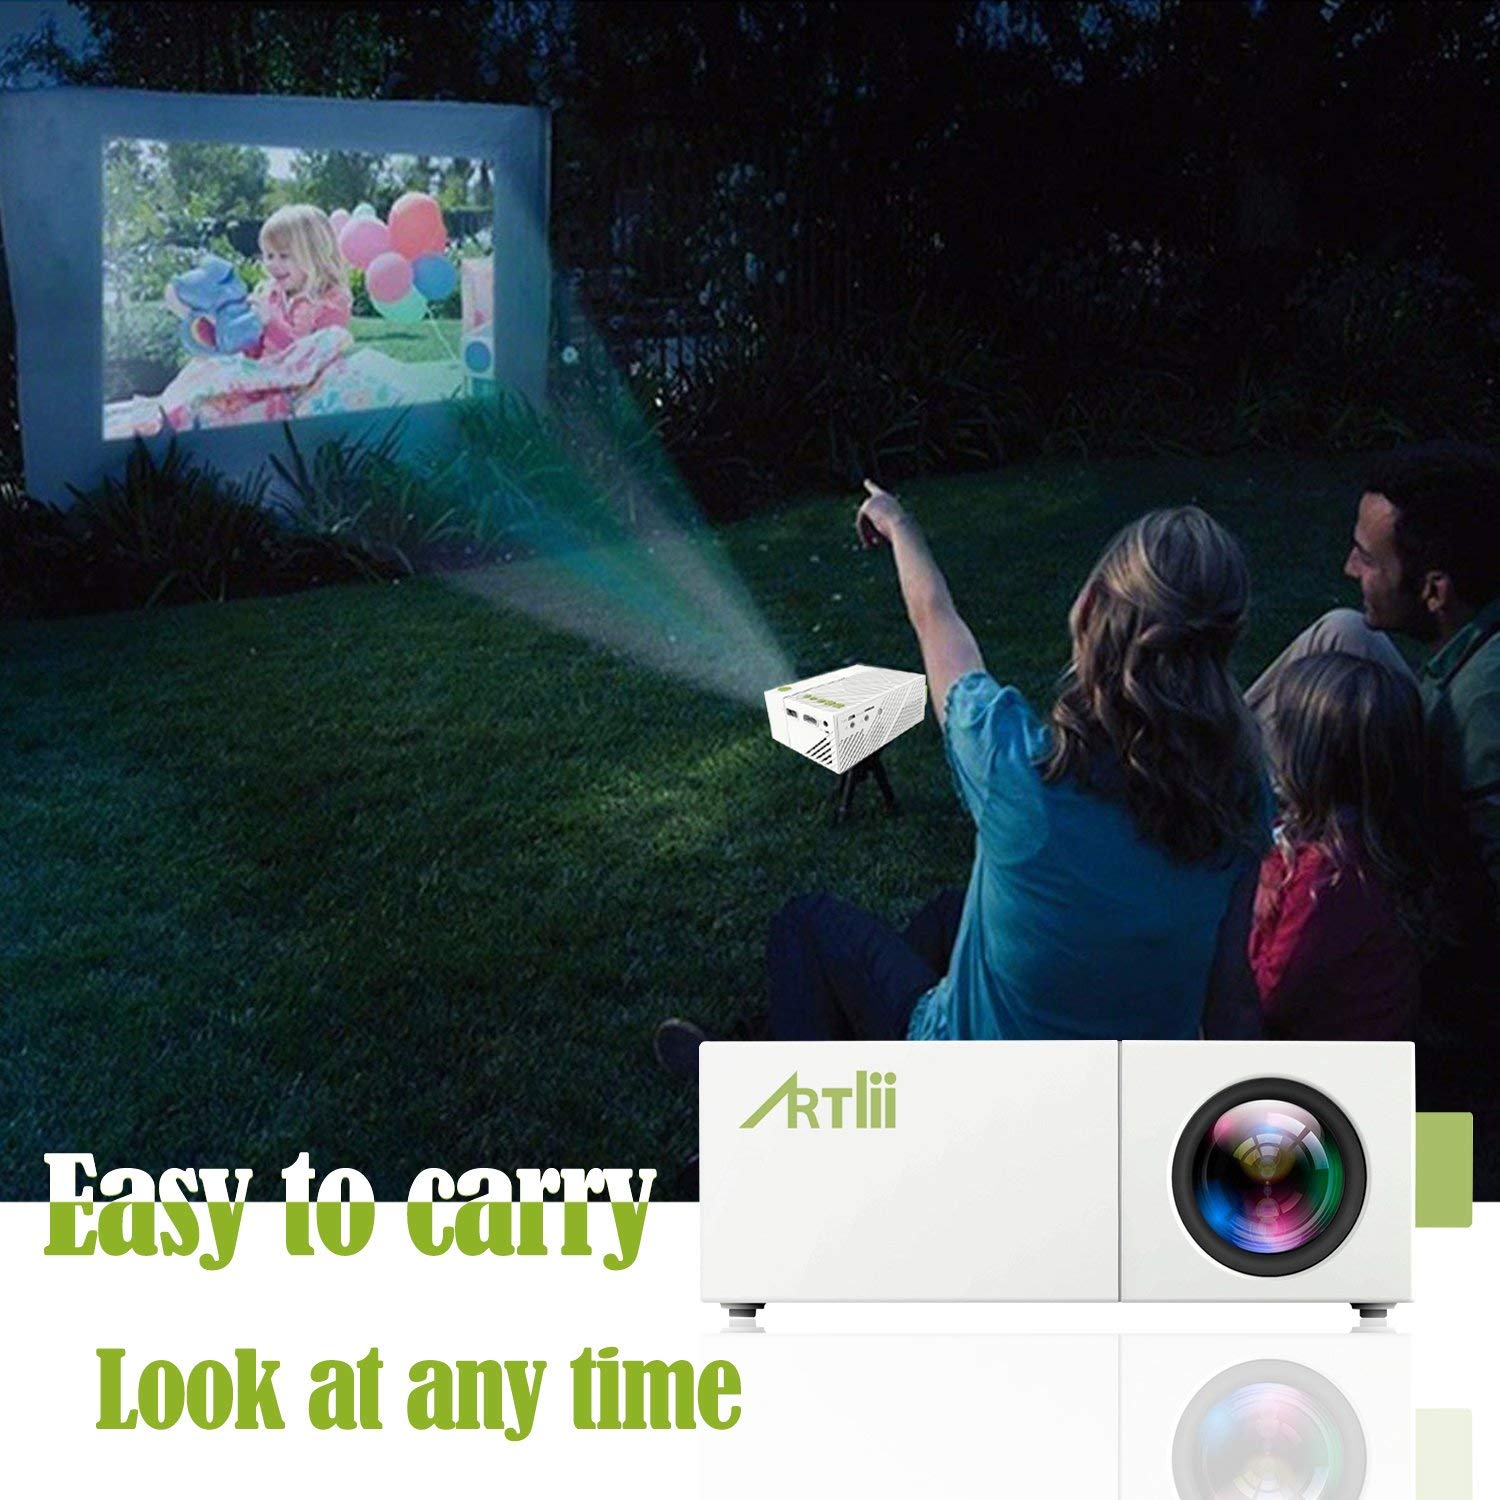 Artlii Projector is easy to carry, look at any time